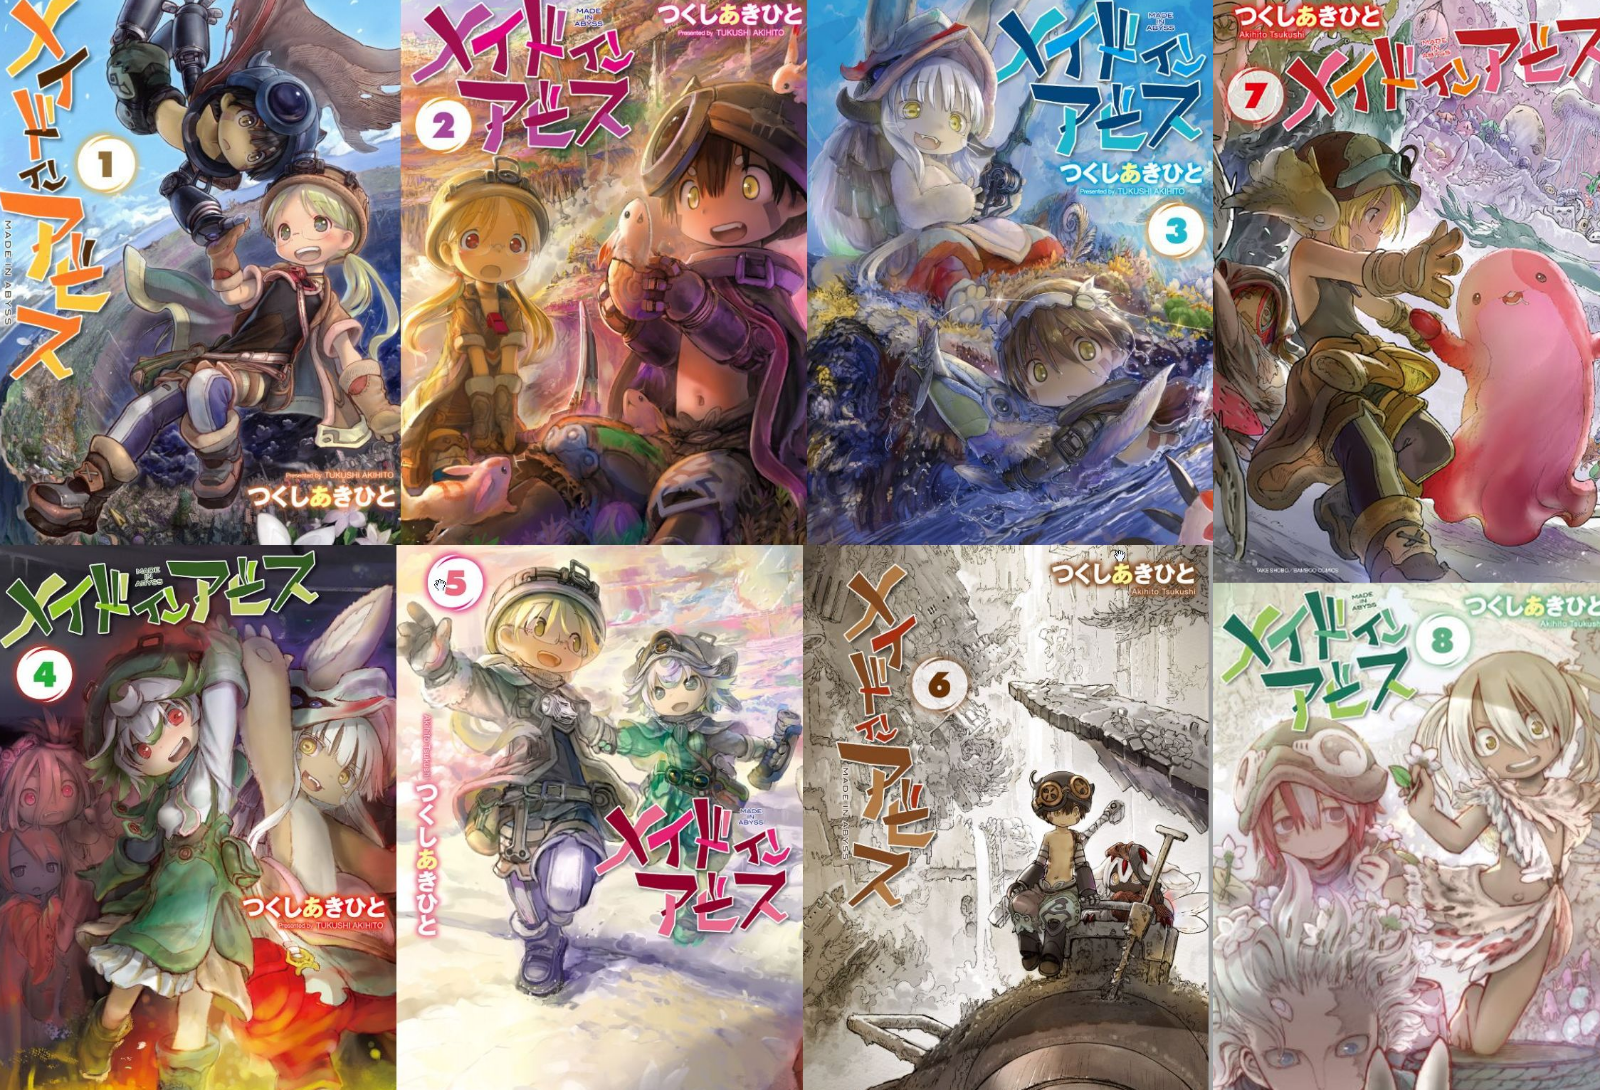 Japanese Comic MADE IN ABYSS COMIC 1-8 COMPLETE SET TSUKUSHI AKIHITO 